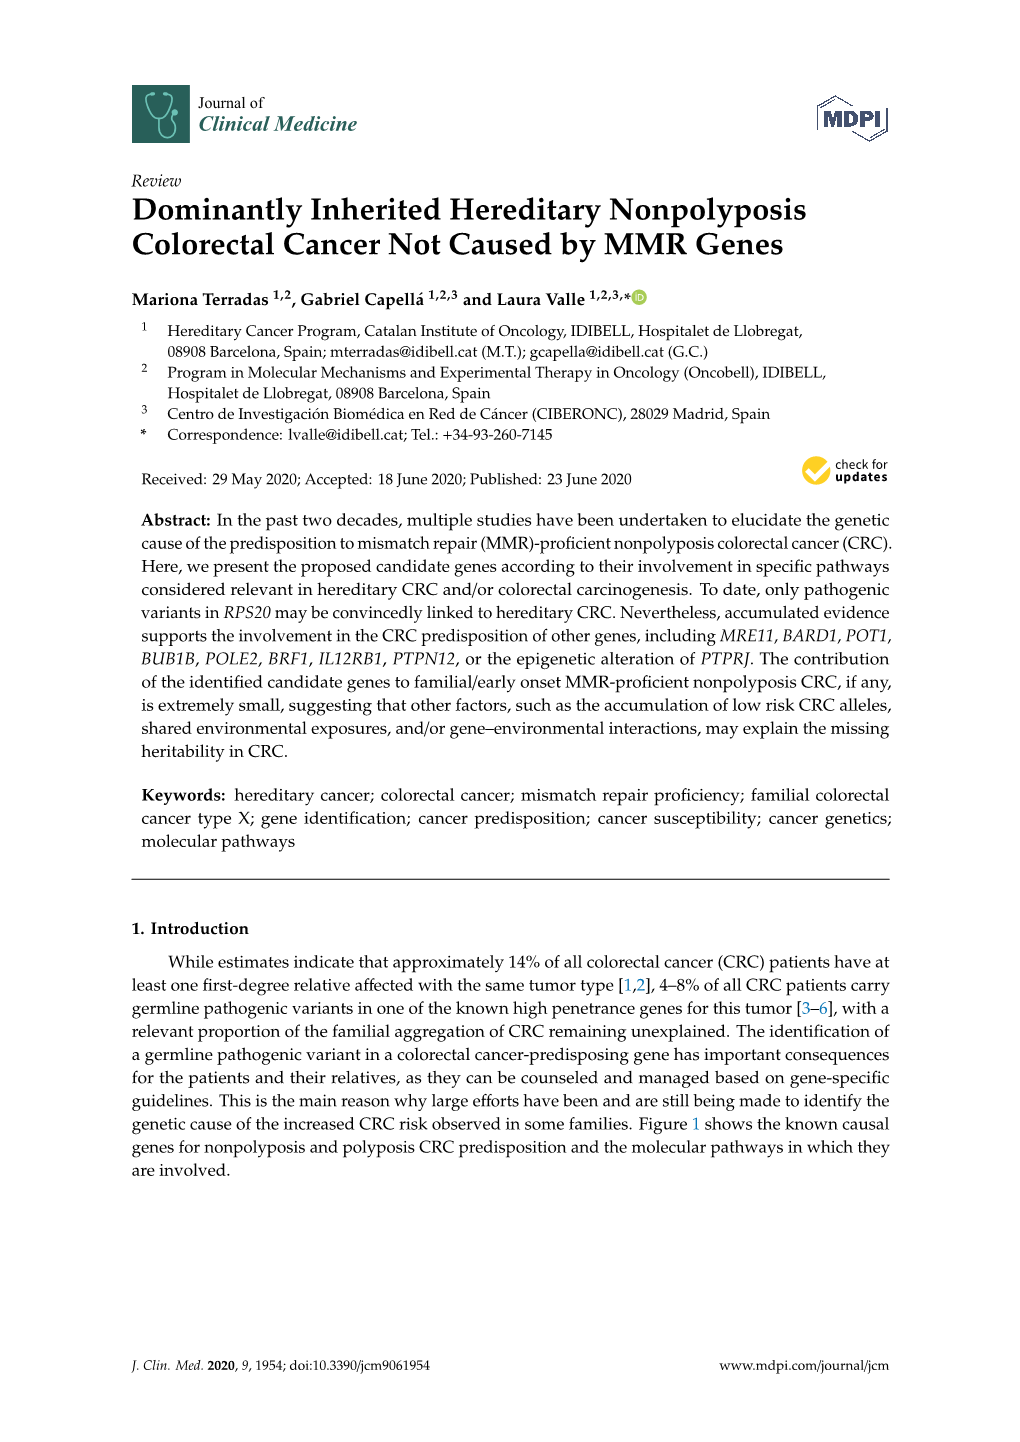 Dominantly Inherited Hereditary Nonpolyposis Colorectal Cancer Not Caused by MMR Genes